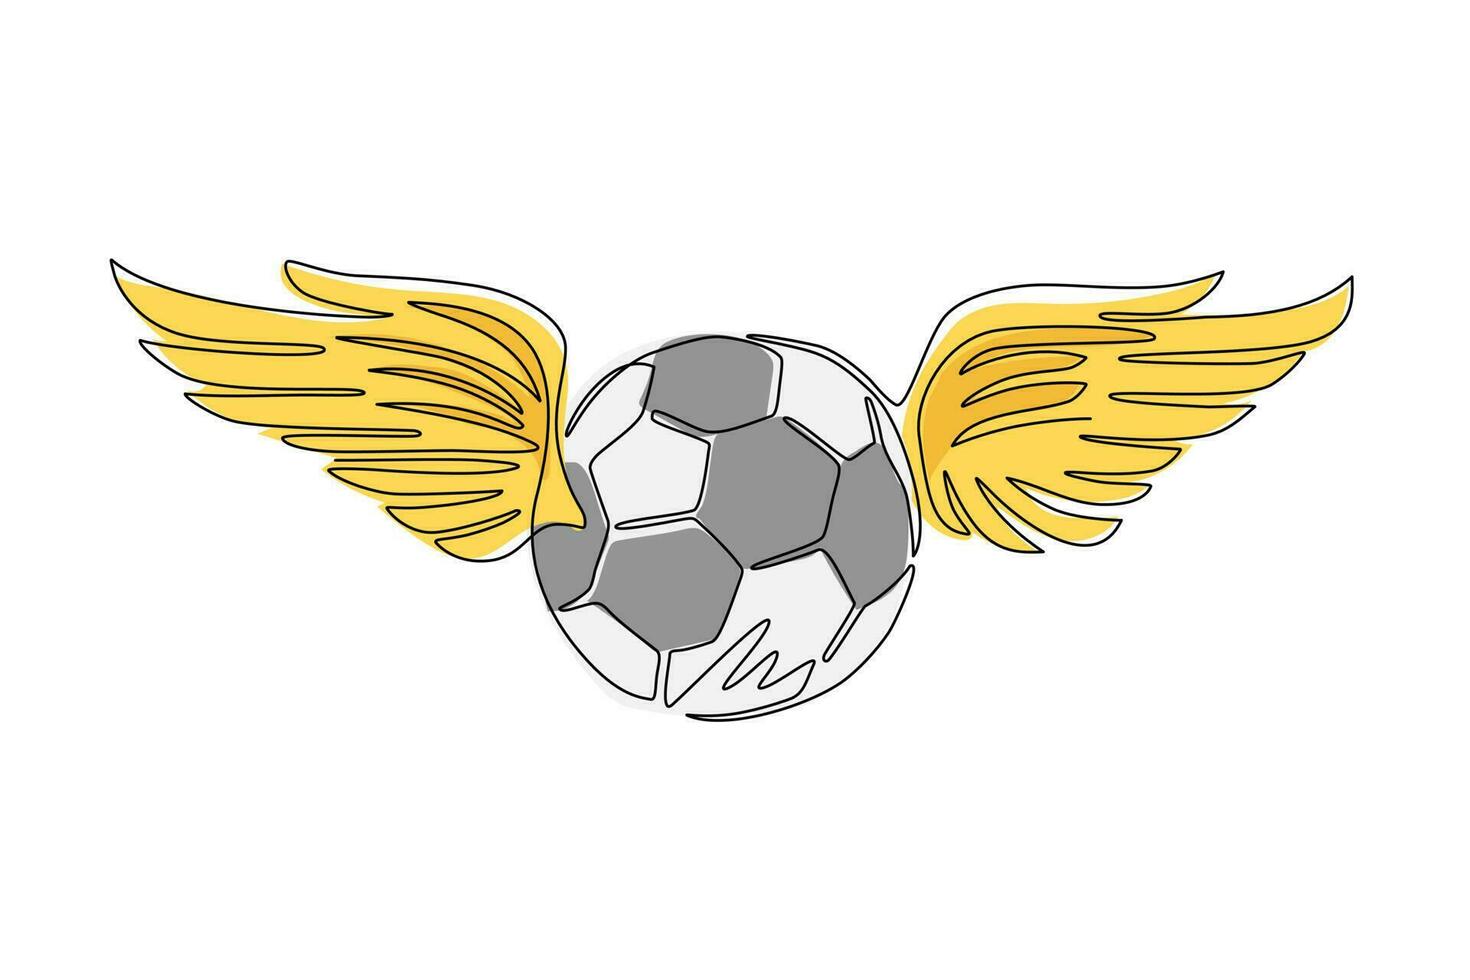 Single continuous line drawing football ball with wings emblem, soccer design. Winged football logo or soccer club symbol. Seamless texture with conceptual winged soccer balls. One line draw vector